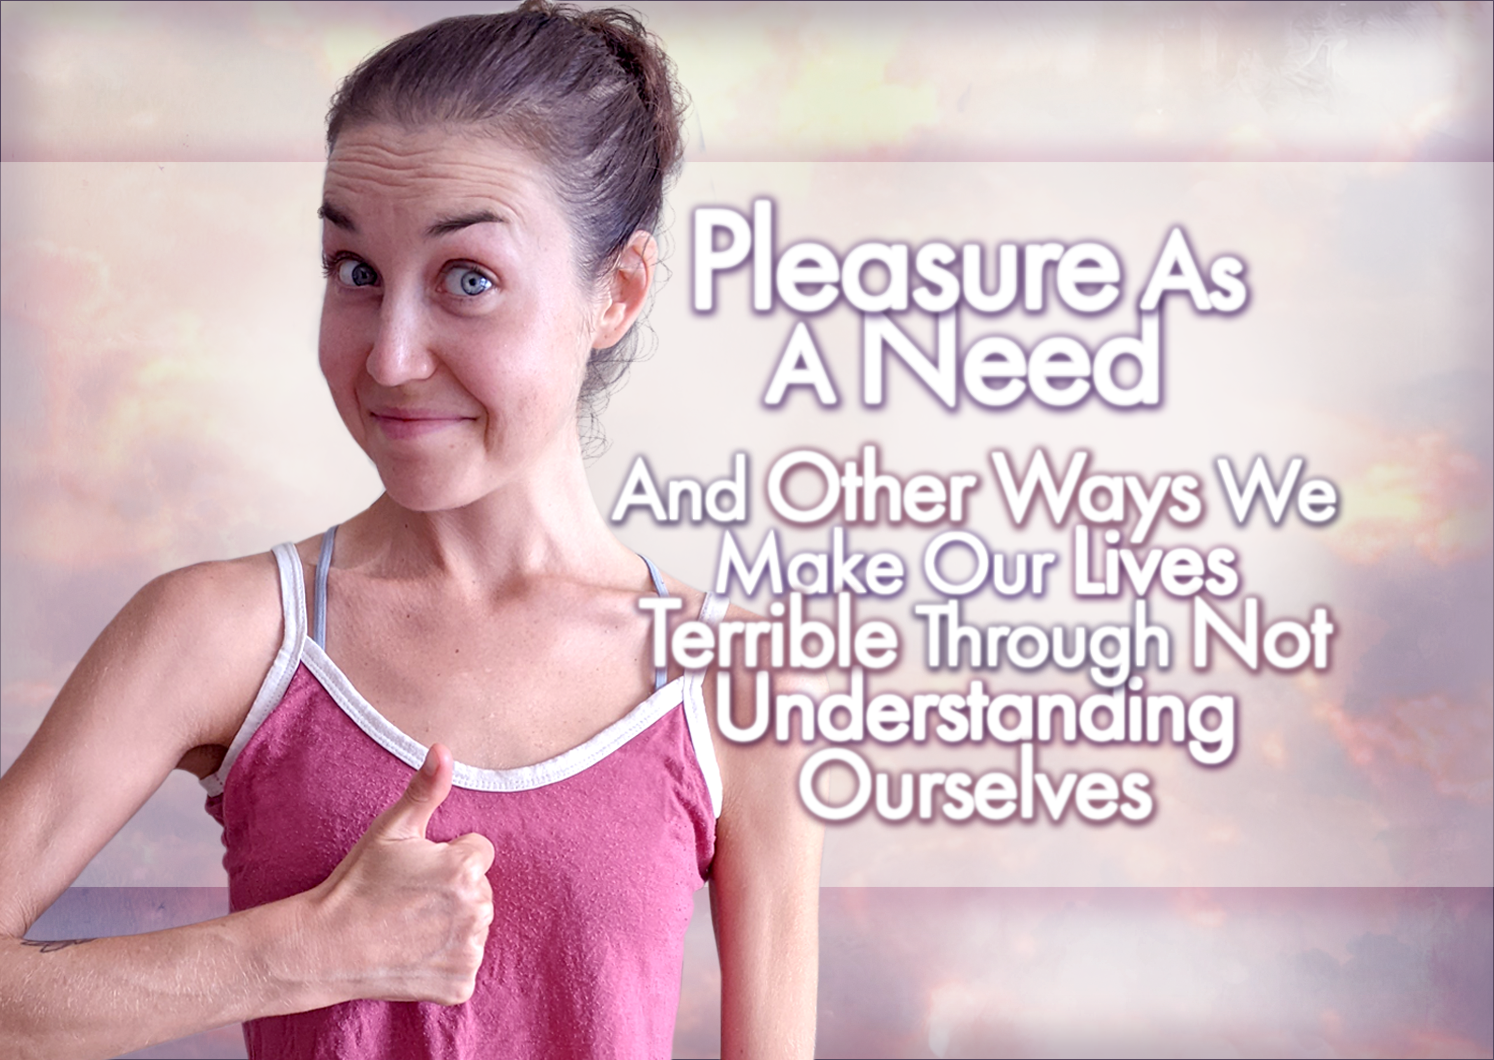 Pleasure As A Need And Other Ways We Make Our Lives Terrible Through Not Understanding Ourselves